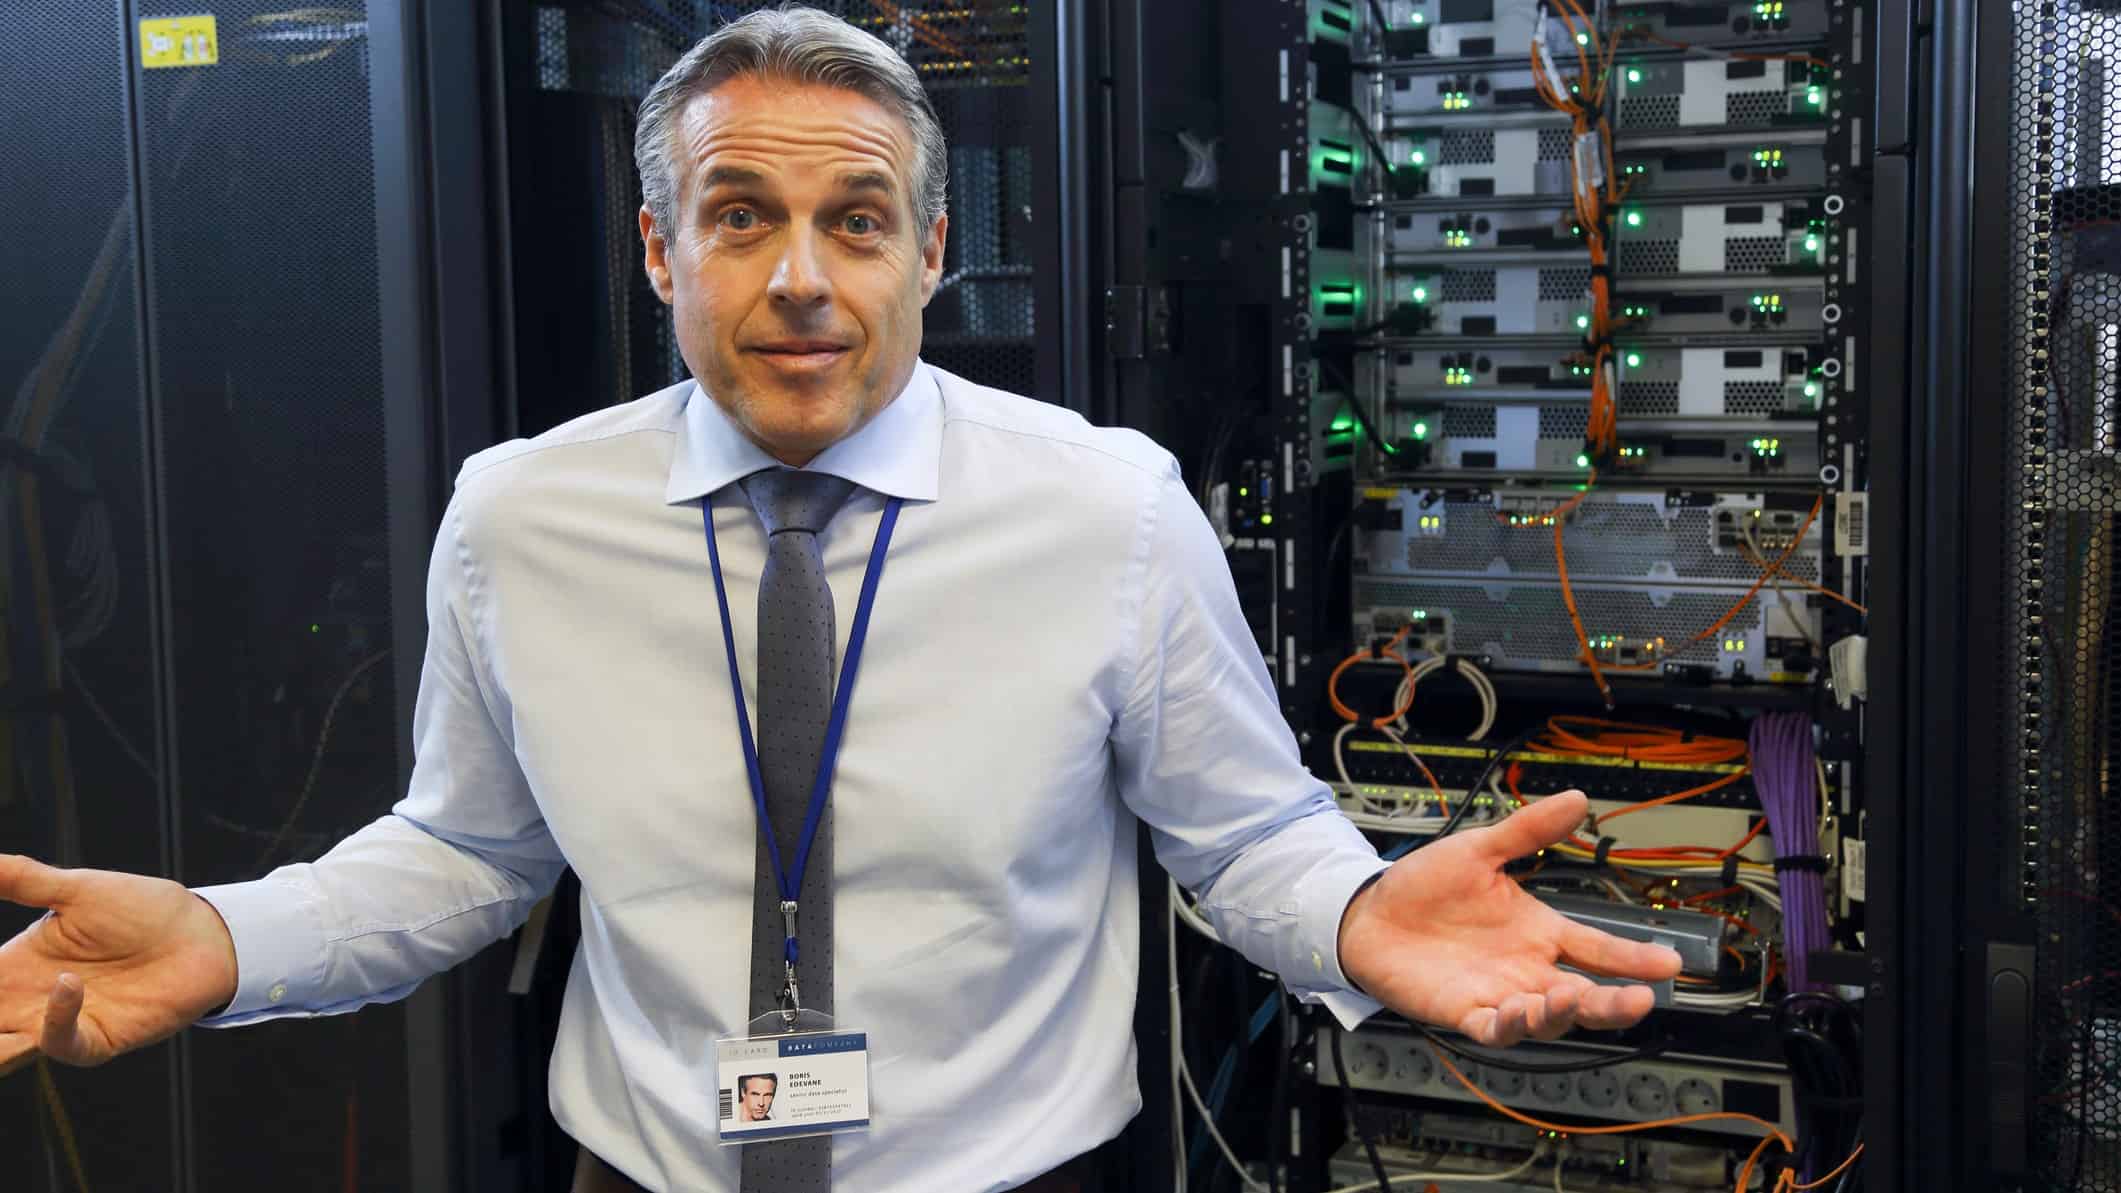 Male IT engineer shrugs his shoulders as he tries to understand network.